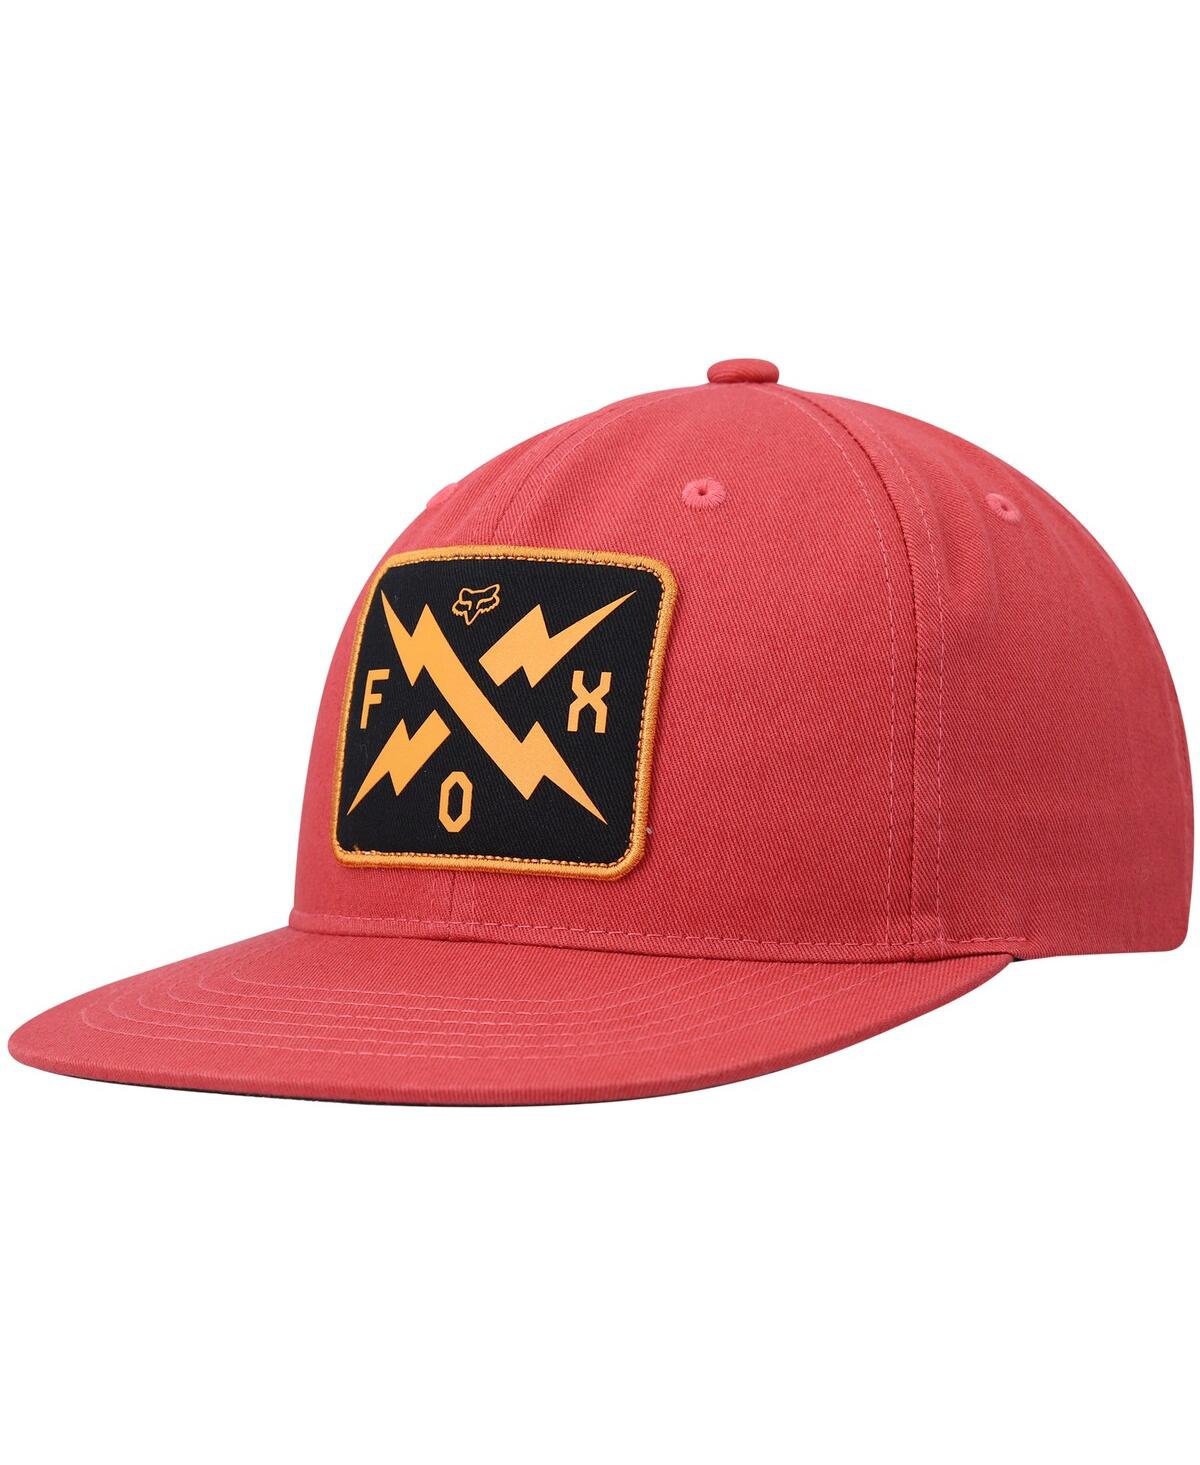 Men's Fox Red Calibrated Snapback Hat - Red